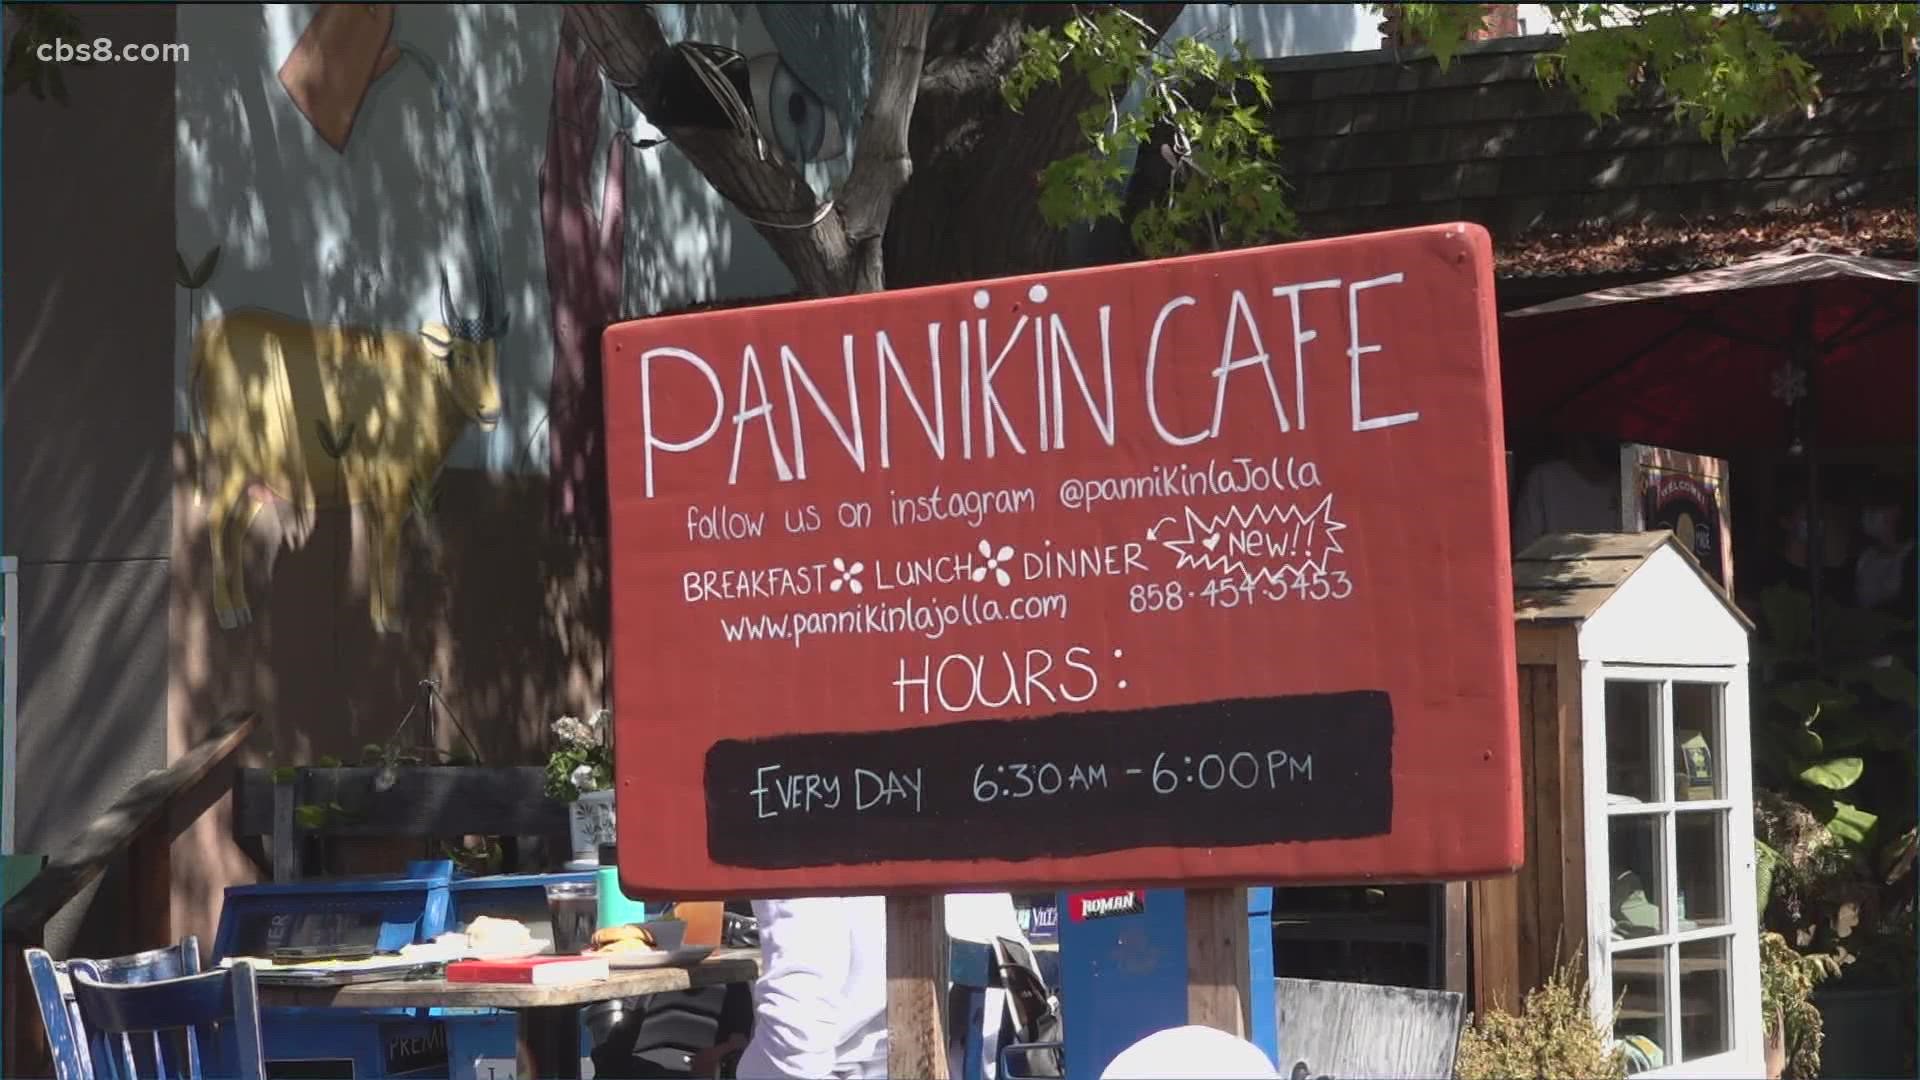 The Pannikin Cafe has survived the pandemic, but now it may be closing for good in less than 30 days.